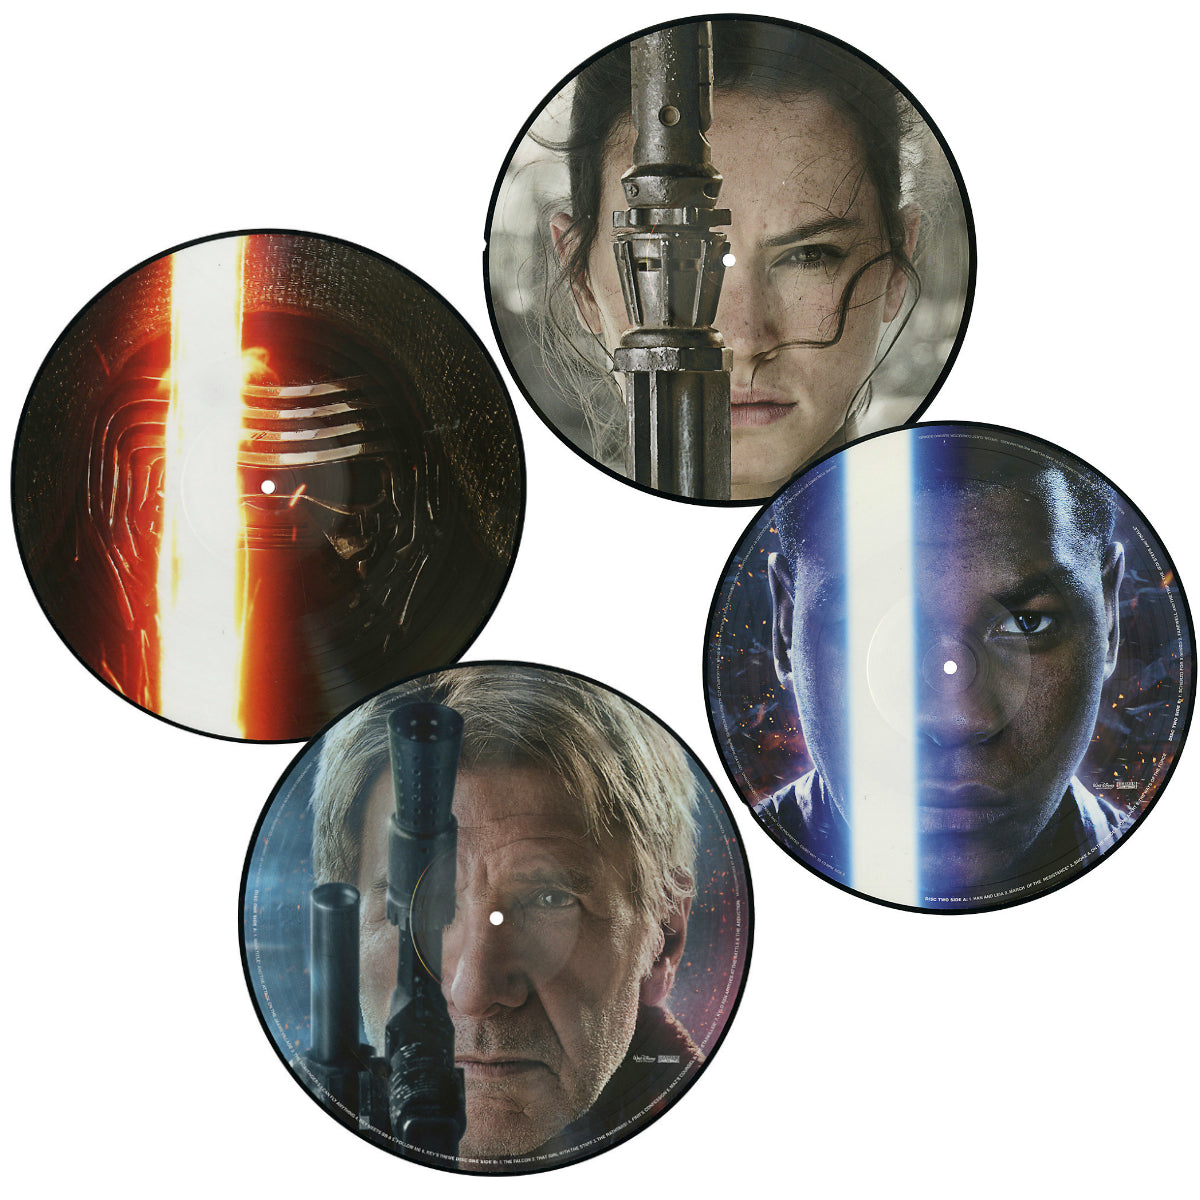 John Williams - Star Wars: The Force Awakens - Limited Edition Picture Disc Vinyl 2LP